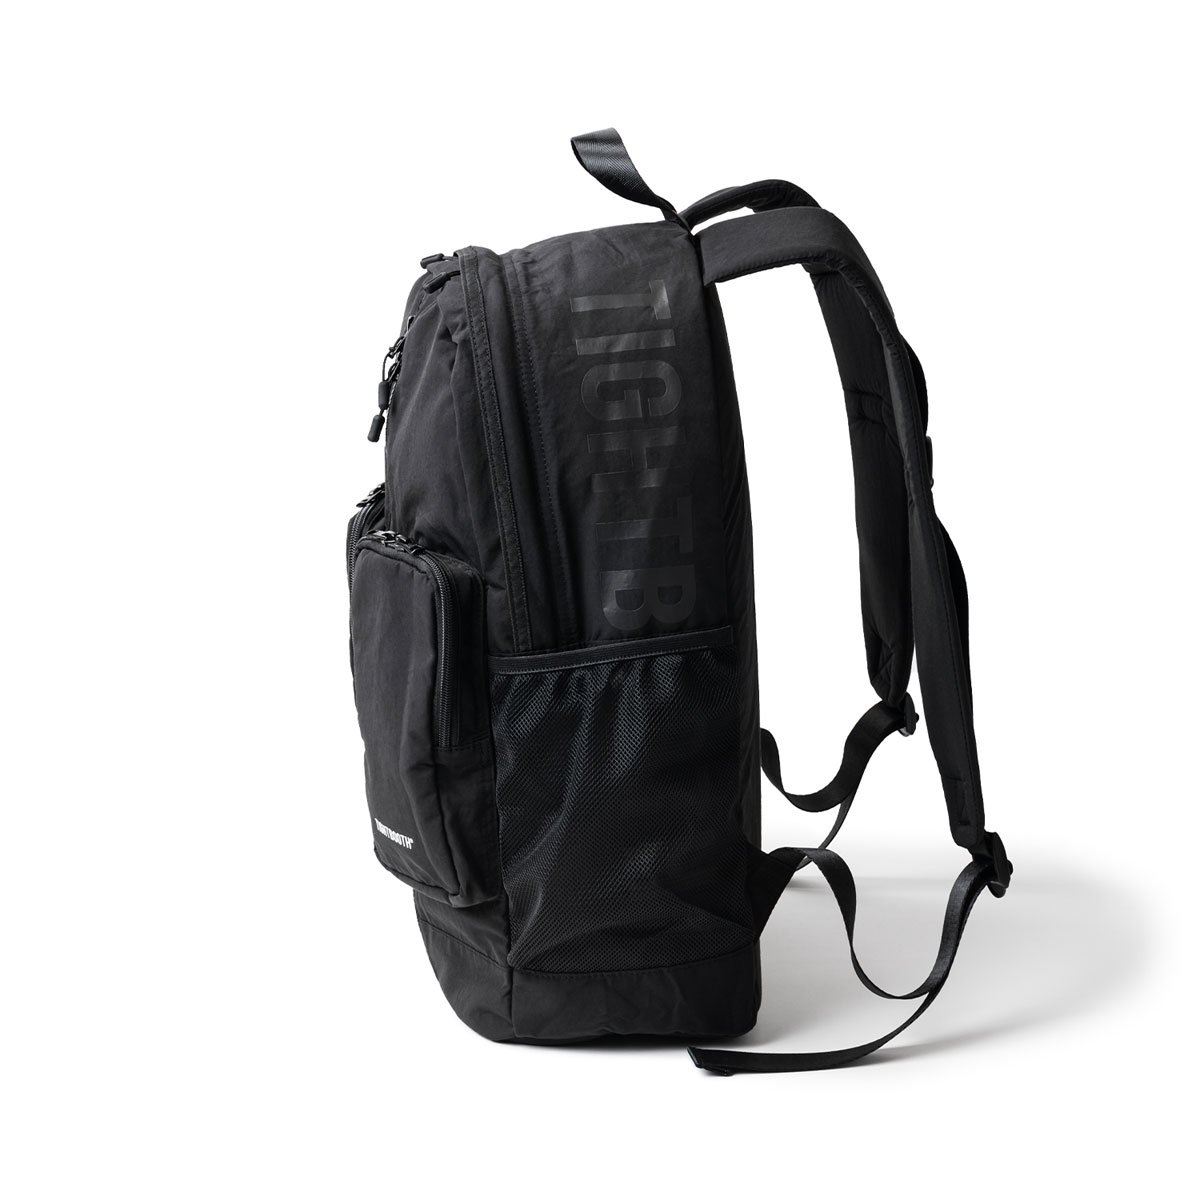 DOUBLE POCKET BACKPACK - TIGHTBOOTH PRODUCTION